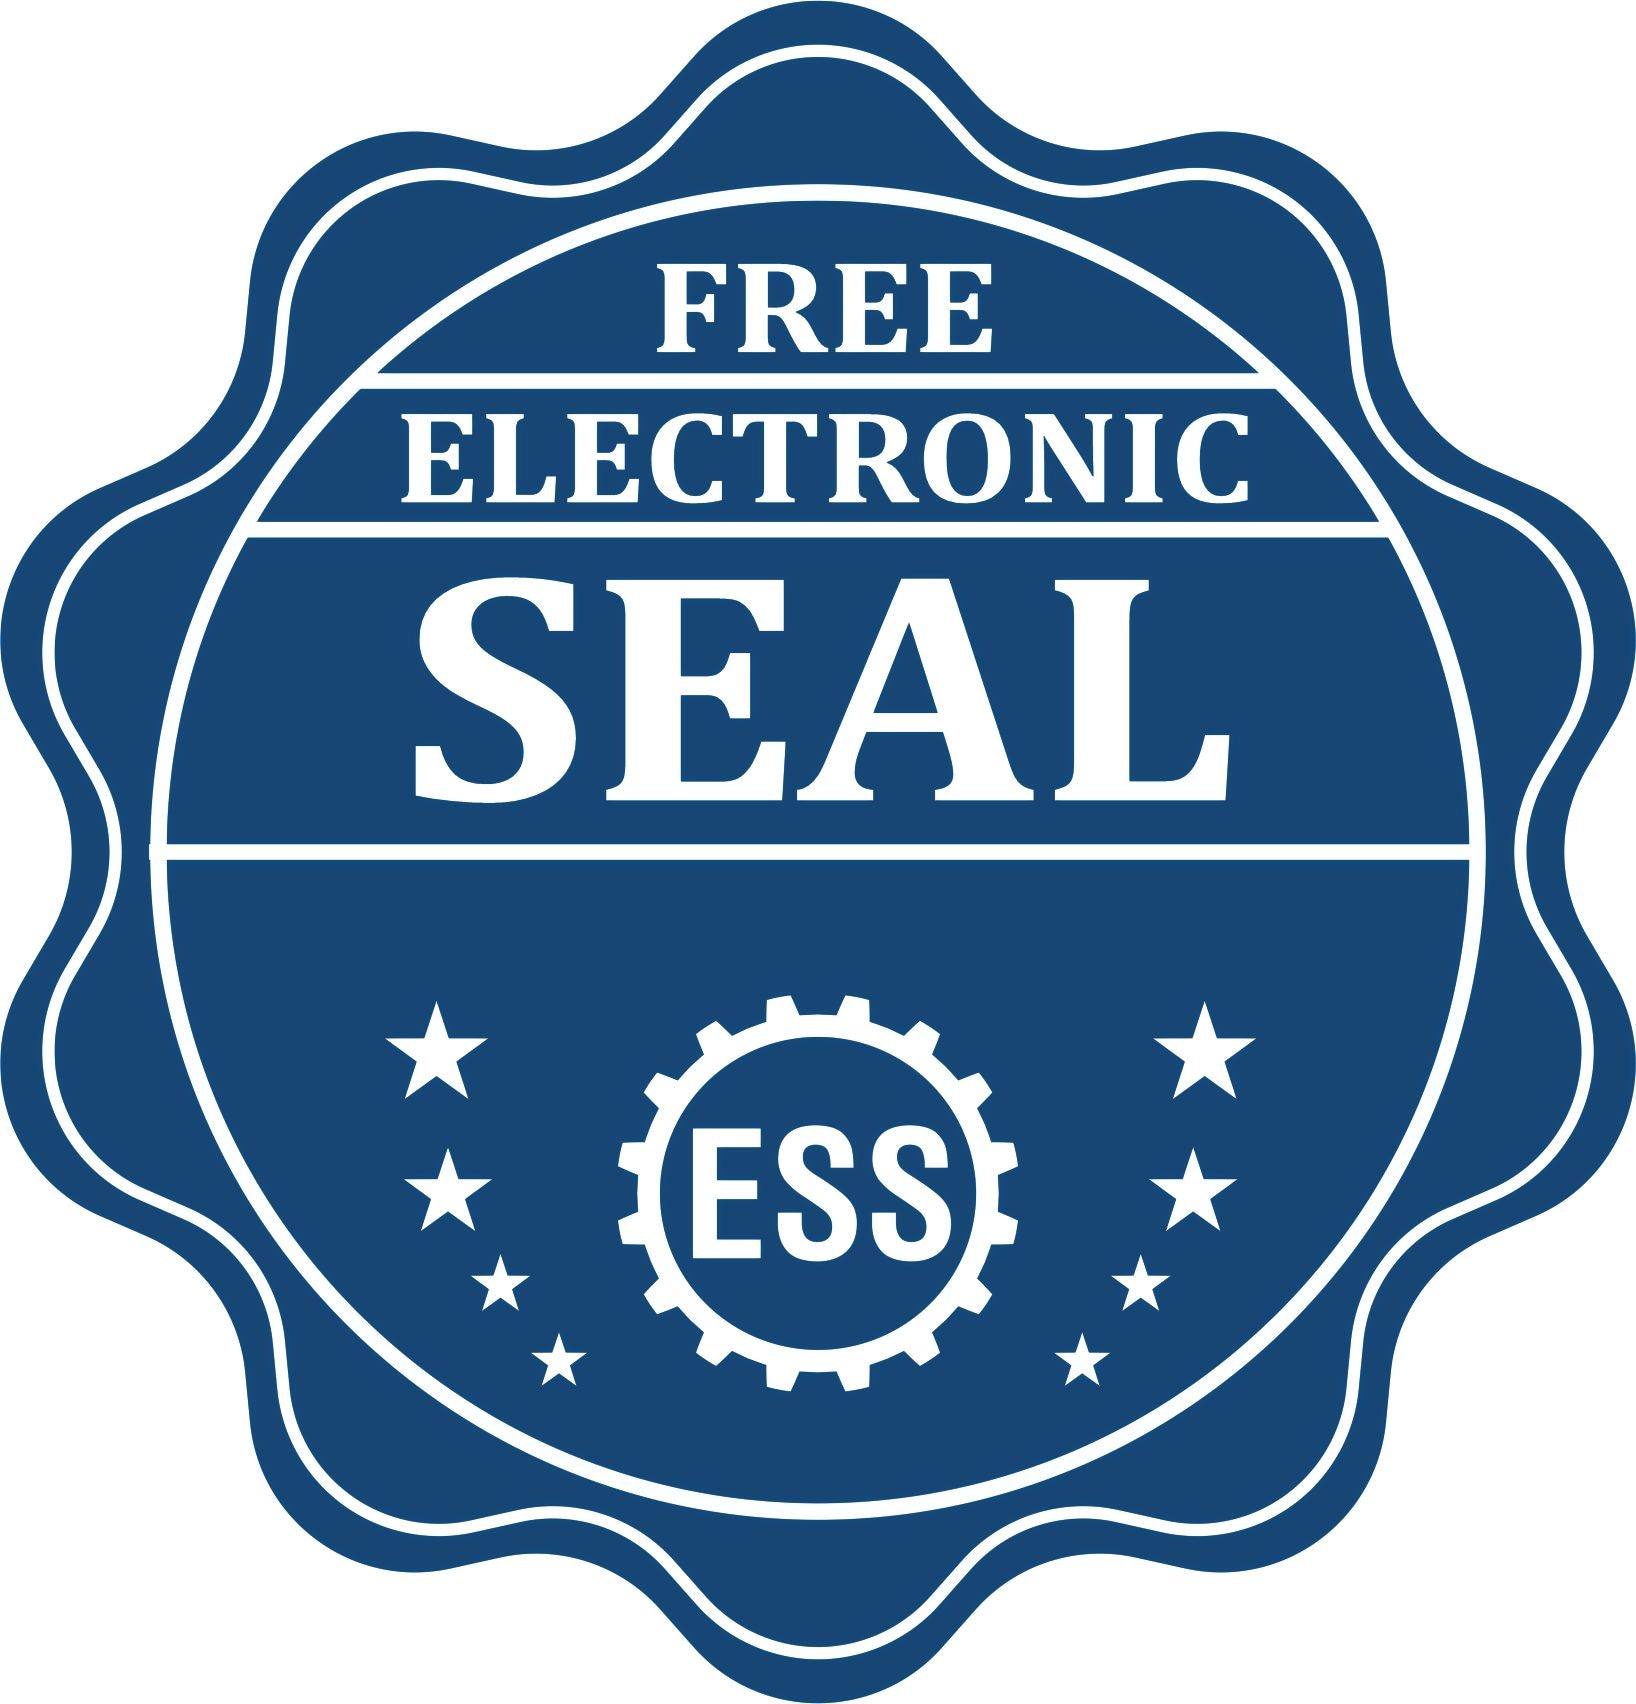 A badge showing a free electronic seal for the Gift New York Landscape Architect Seal with stars and the ESS gear on the emblem.